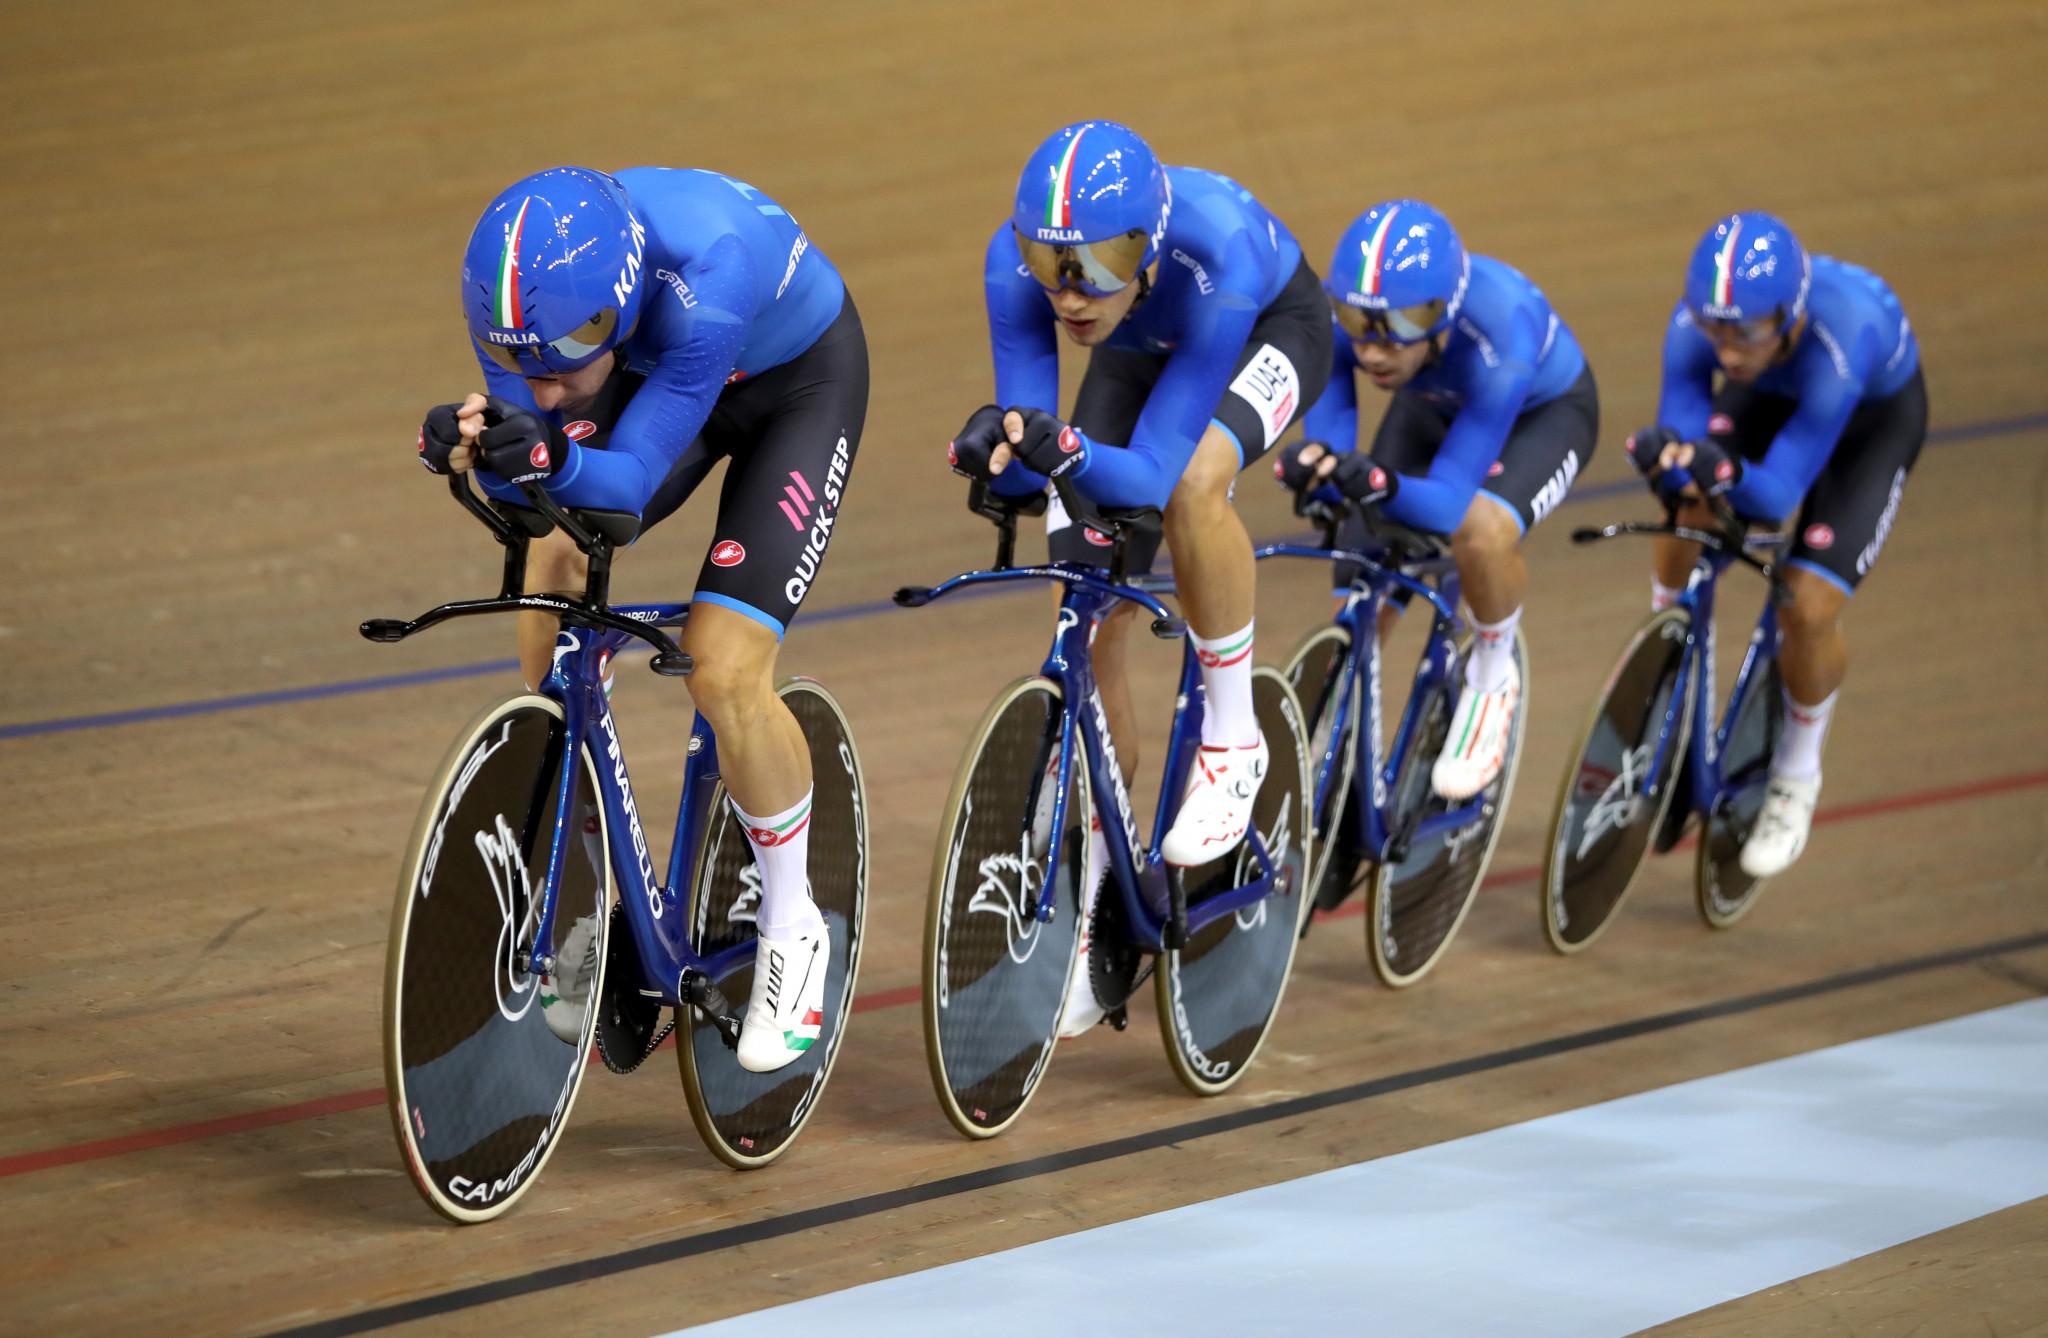 Italy posted the quickest men's qualifying time and will face Britain in the first round ©Getty Images